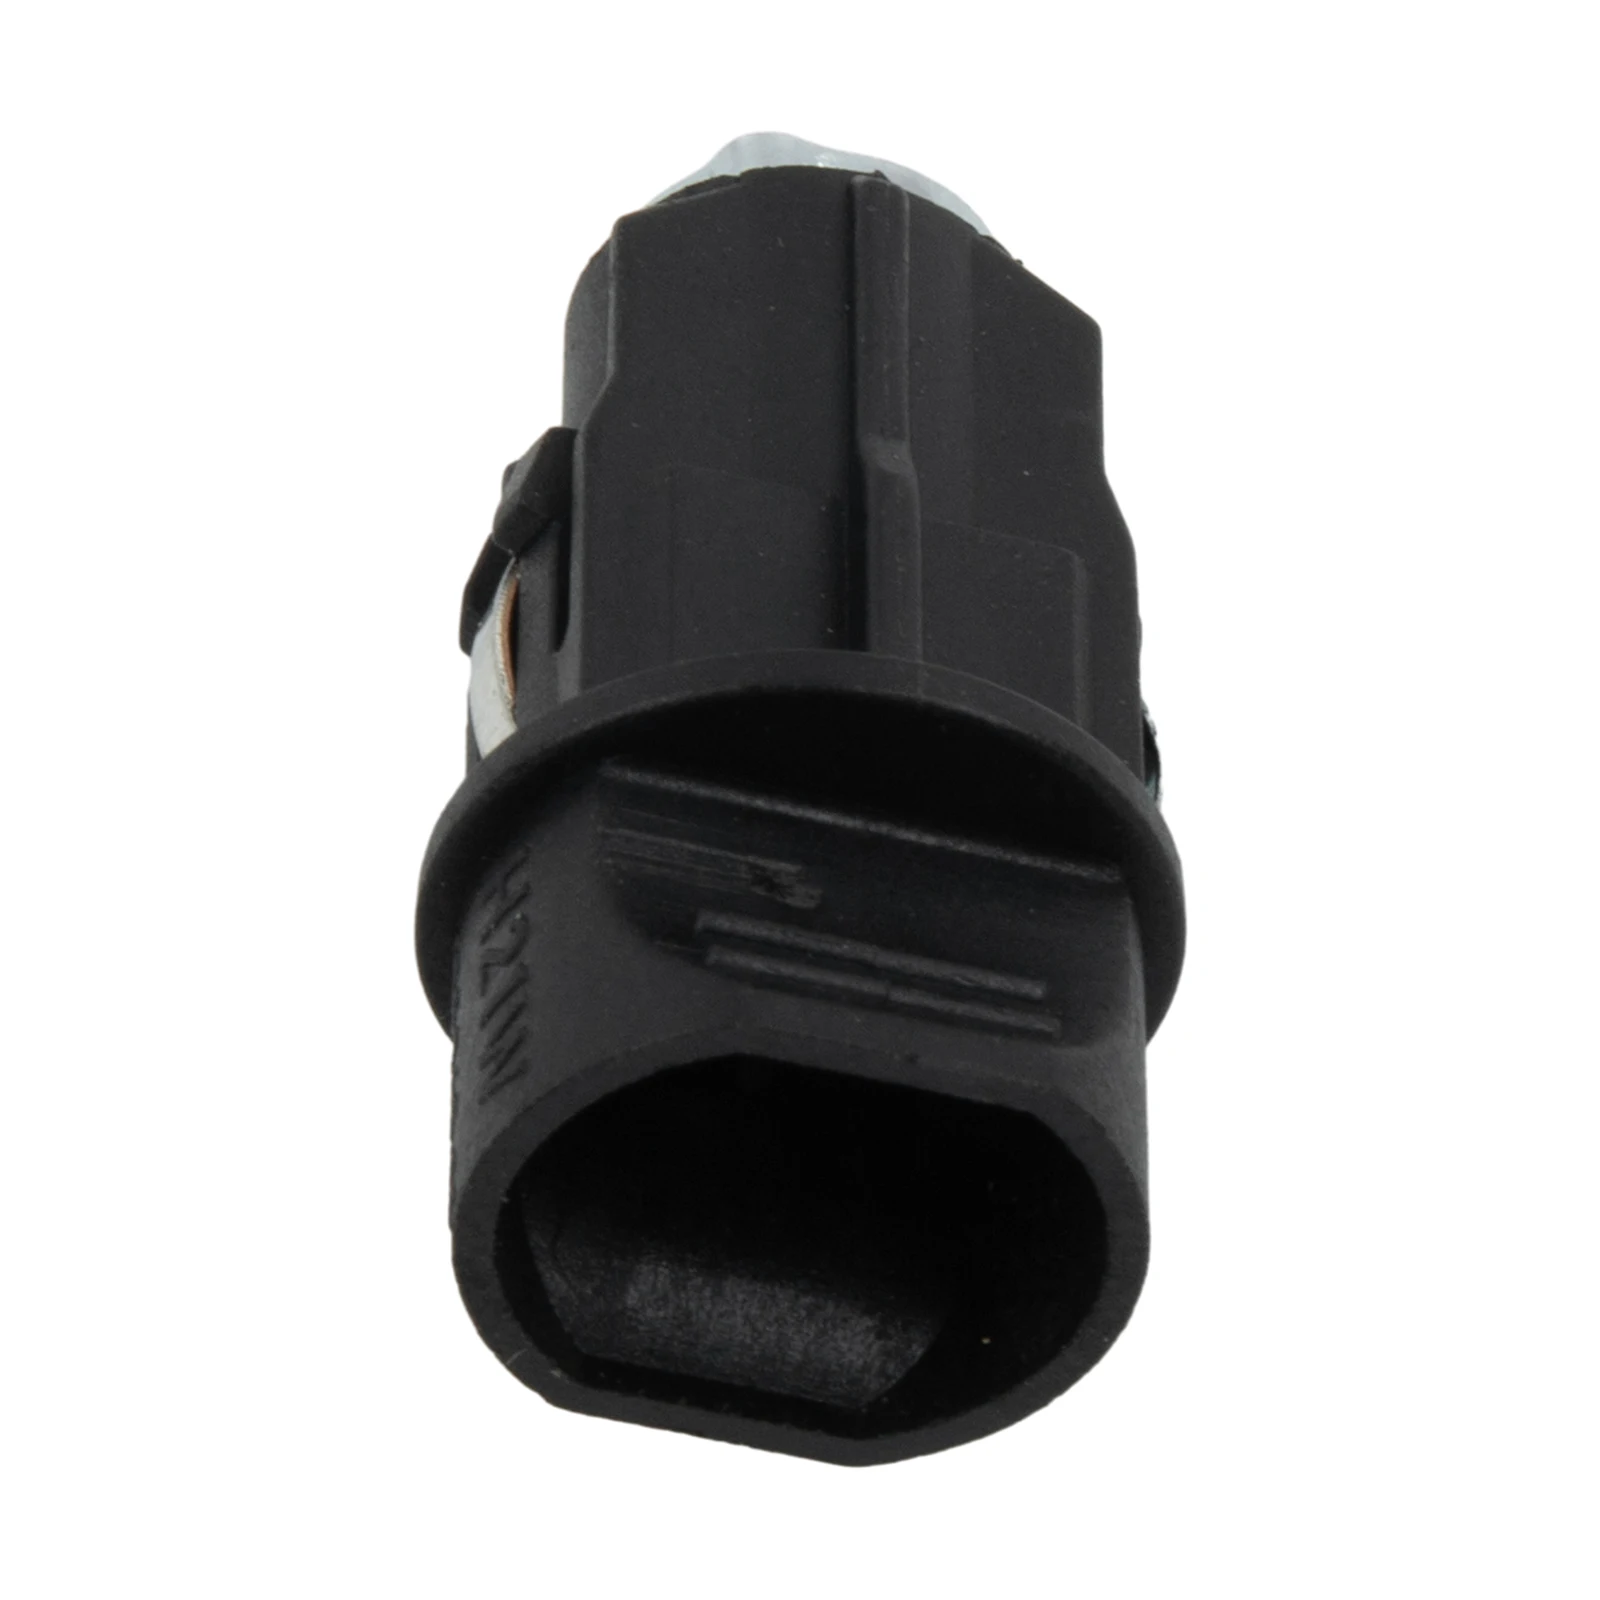 

Tail Lamp Socket Rear Lamp Socket Car Accessories 1pc 63117407330 Black Electric Components Plastic New Practical